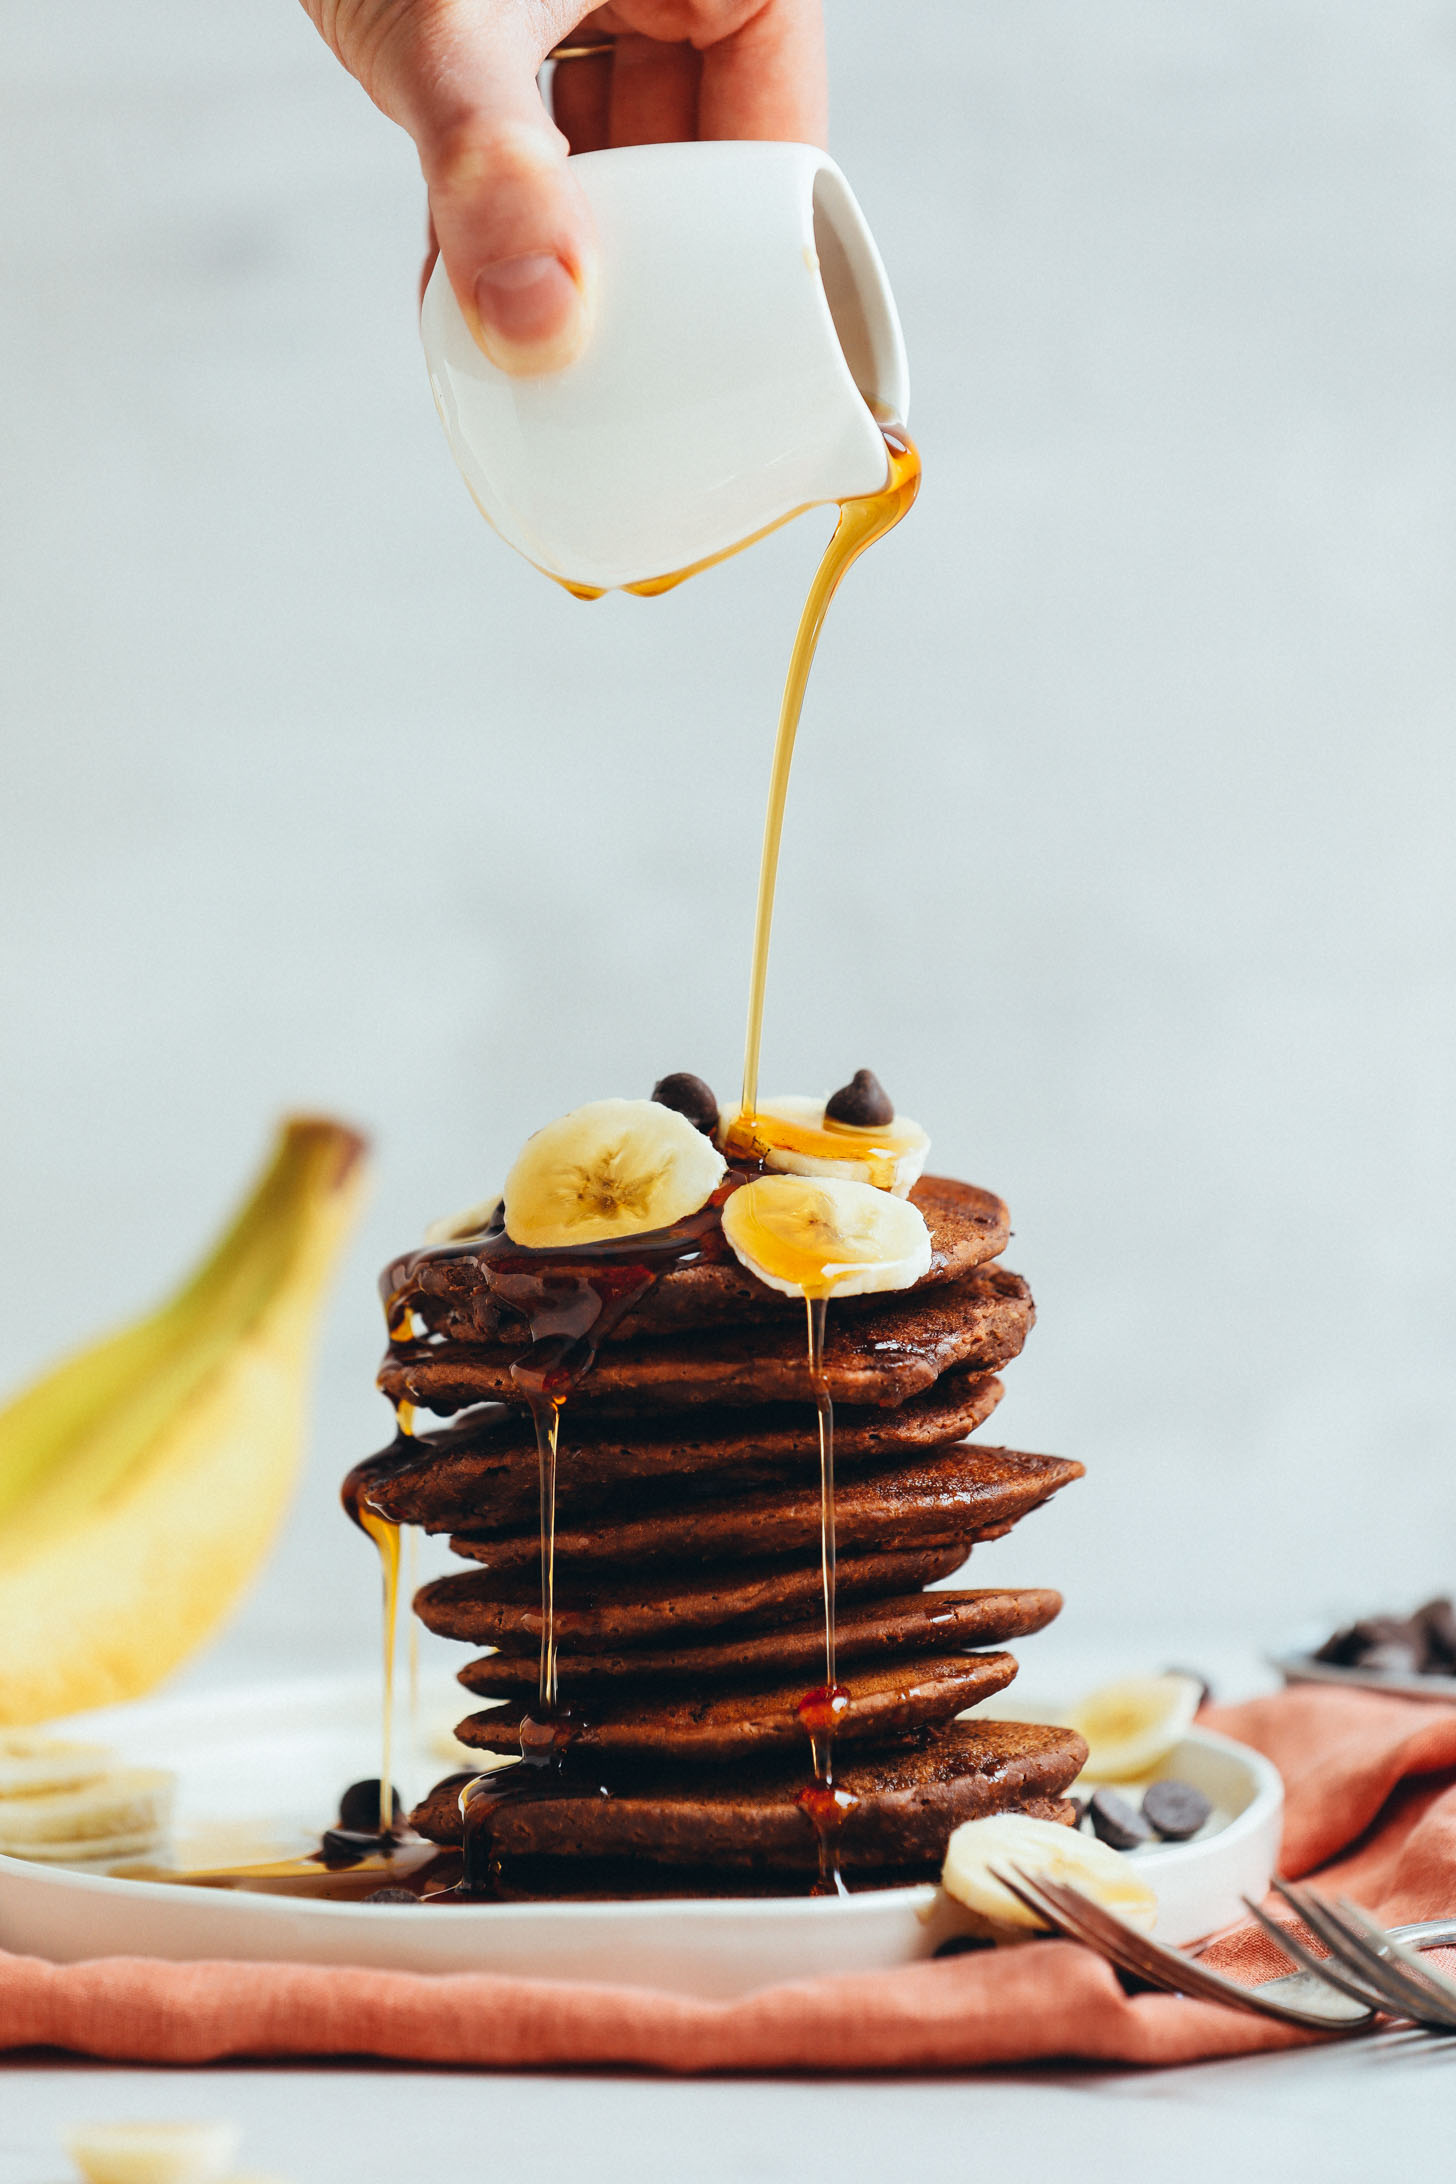 Pouring maple syrup onto a stack of naturally-sweetened Vegan Chocolate Chocolate Chip Pancakes